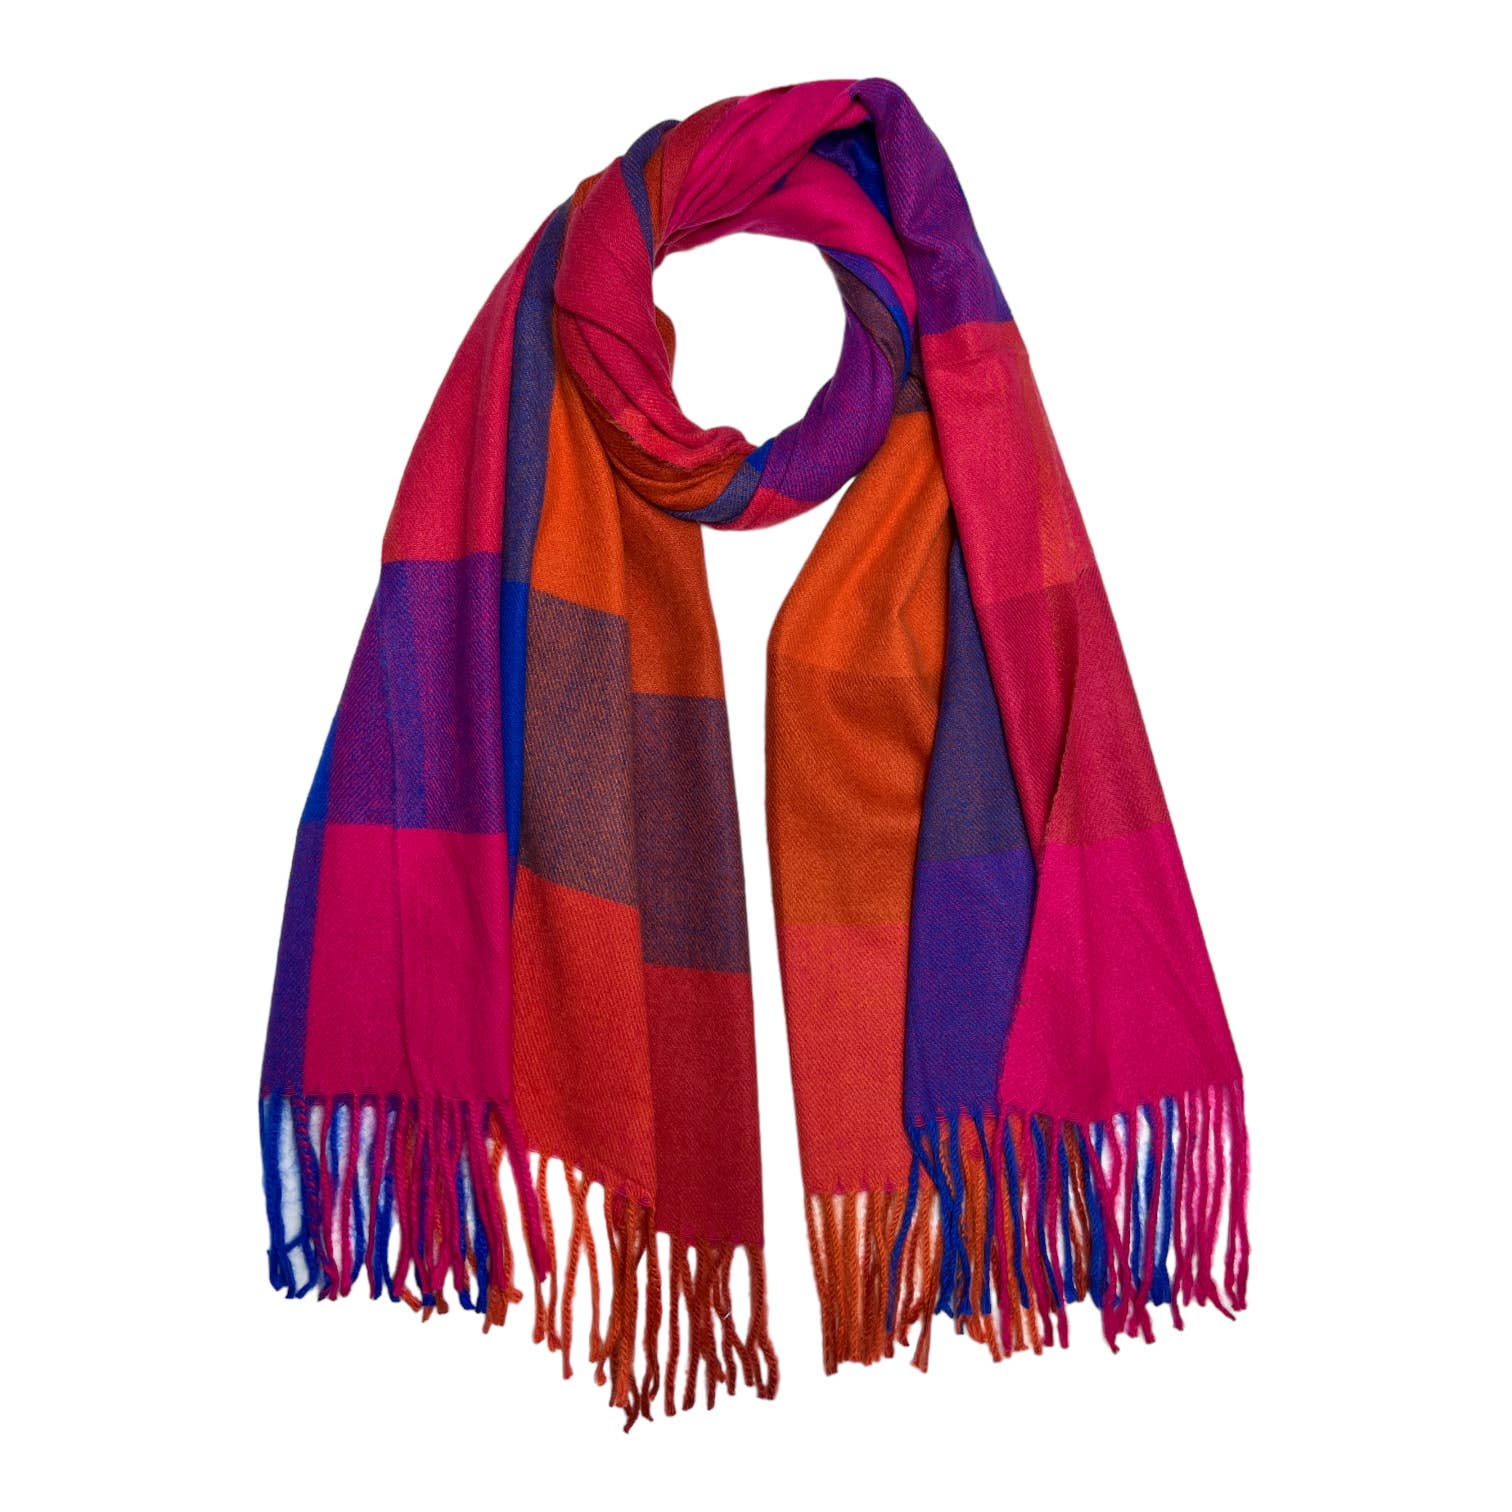 Classic colourful woolmix check scarf with tassels: Festive - The Nancy Smillie Shop - Art, Jewellery & Designer Gifts Glasgow